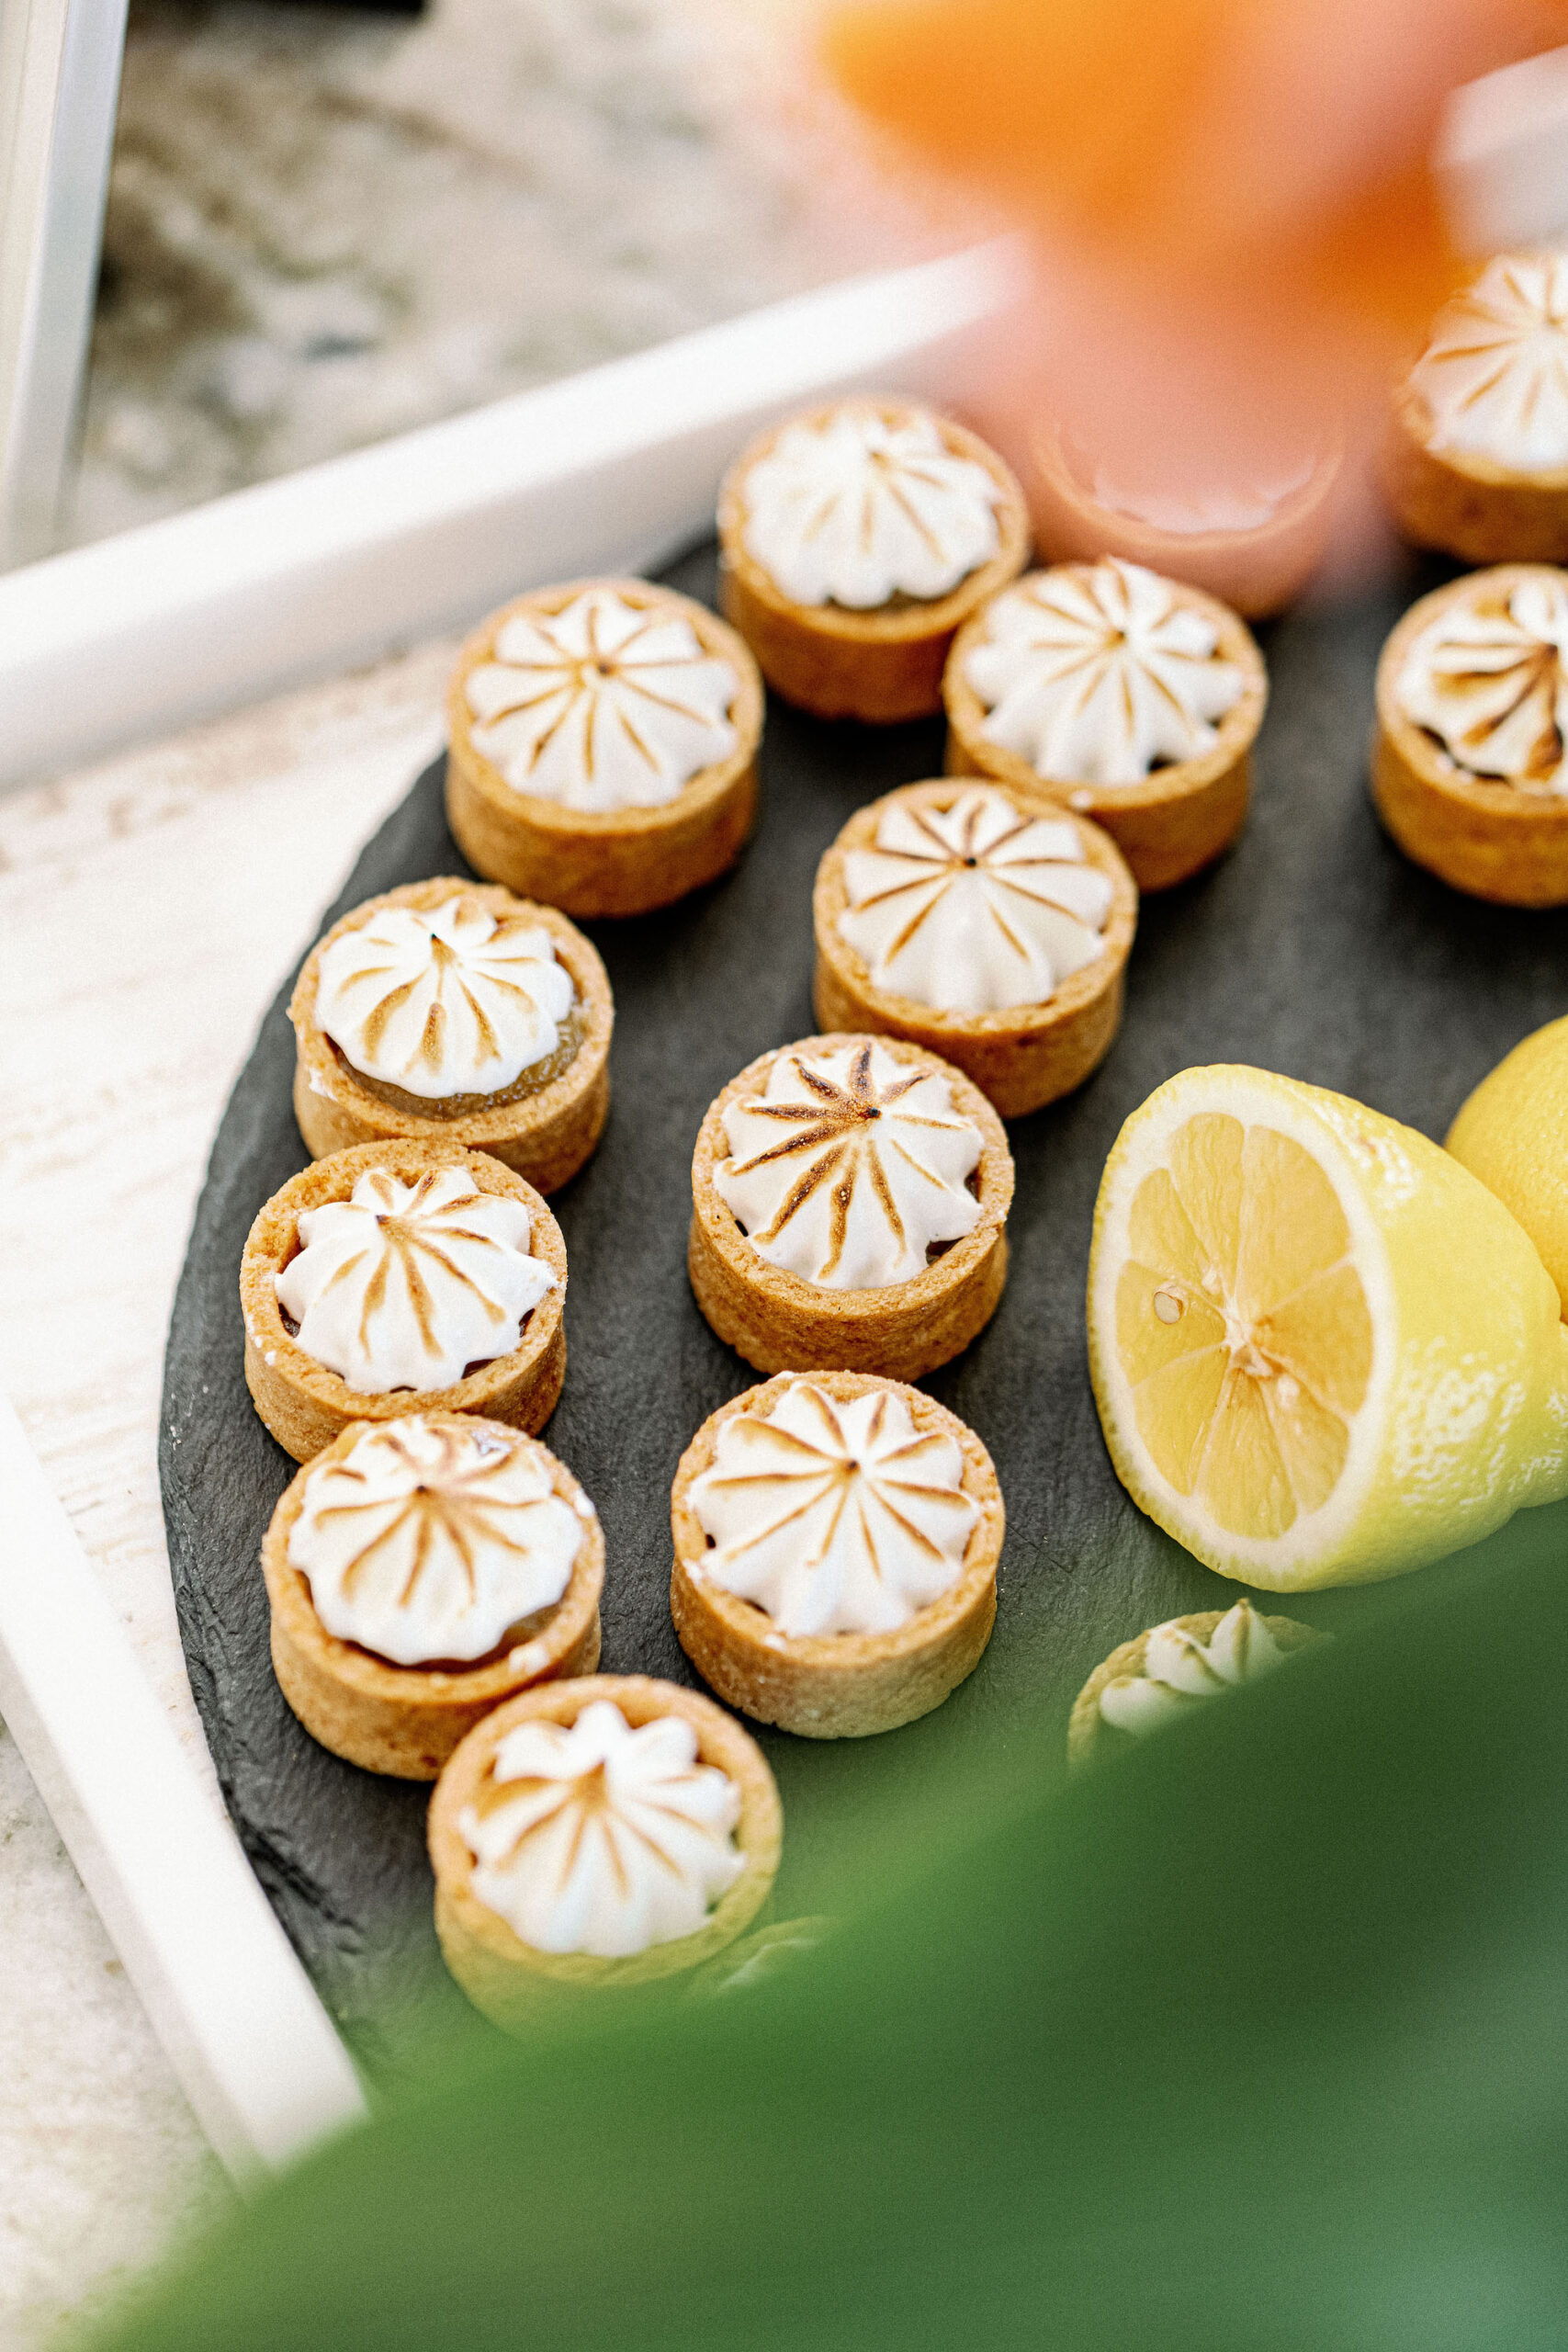 Tampa Bay Catering Company Elite Events Catering | Dewitt for Love Photography | Mini Lemon Merengue Pies